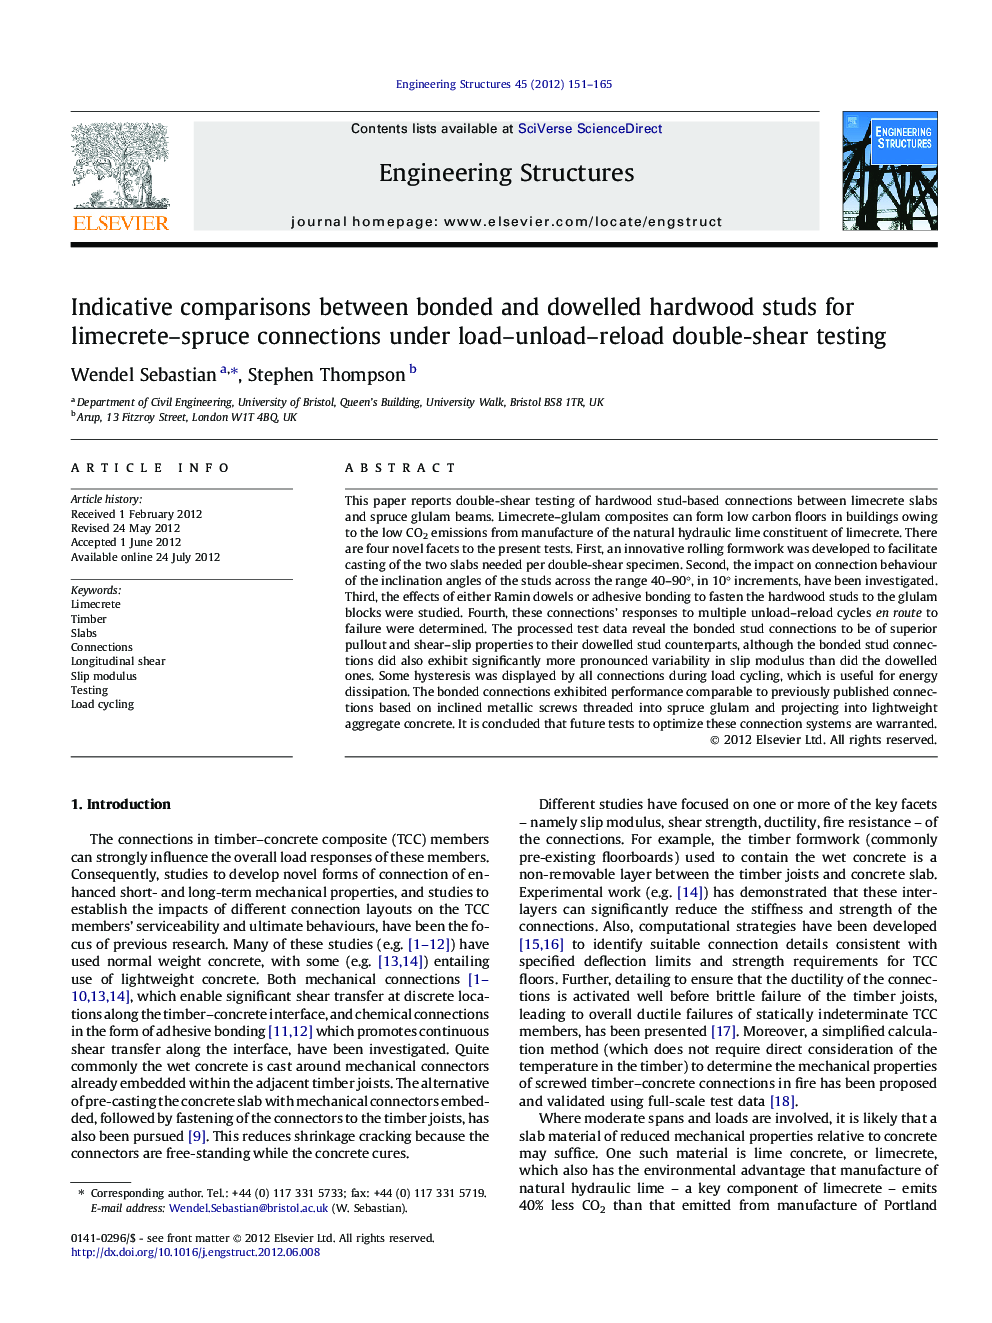 Indicative comparisons between bonded and dowelled hardwood studs for limecrete–spruce connections under load–unload–reload double-shear testing